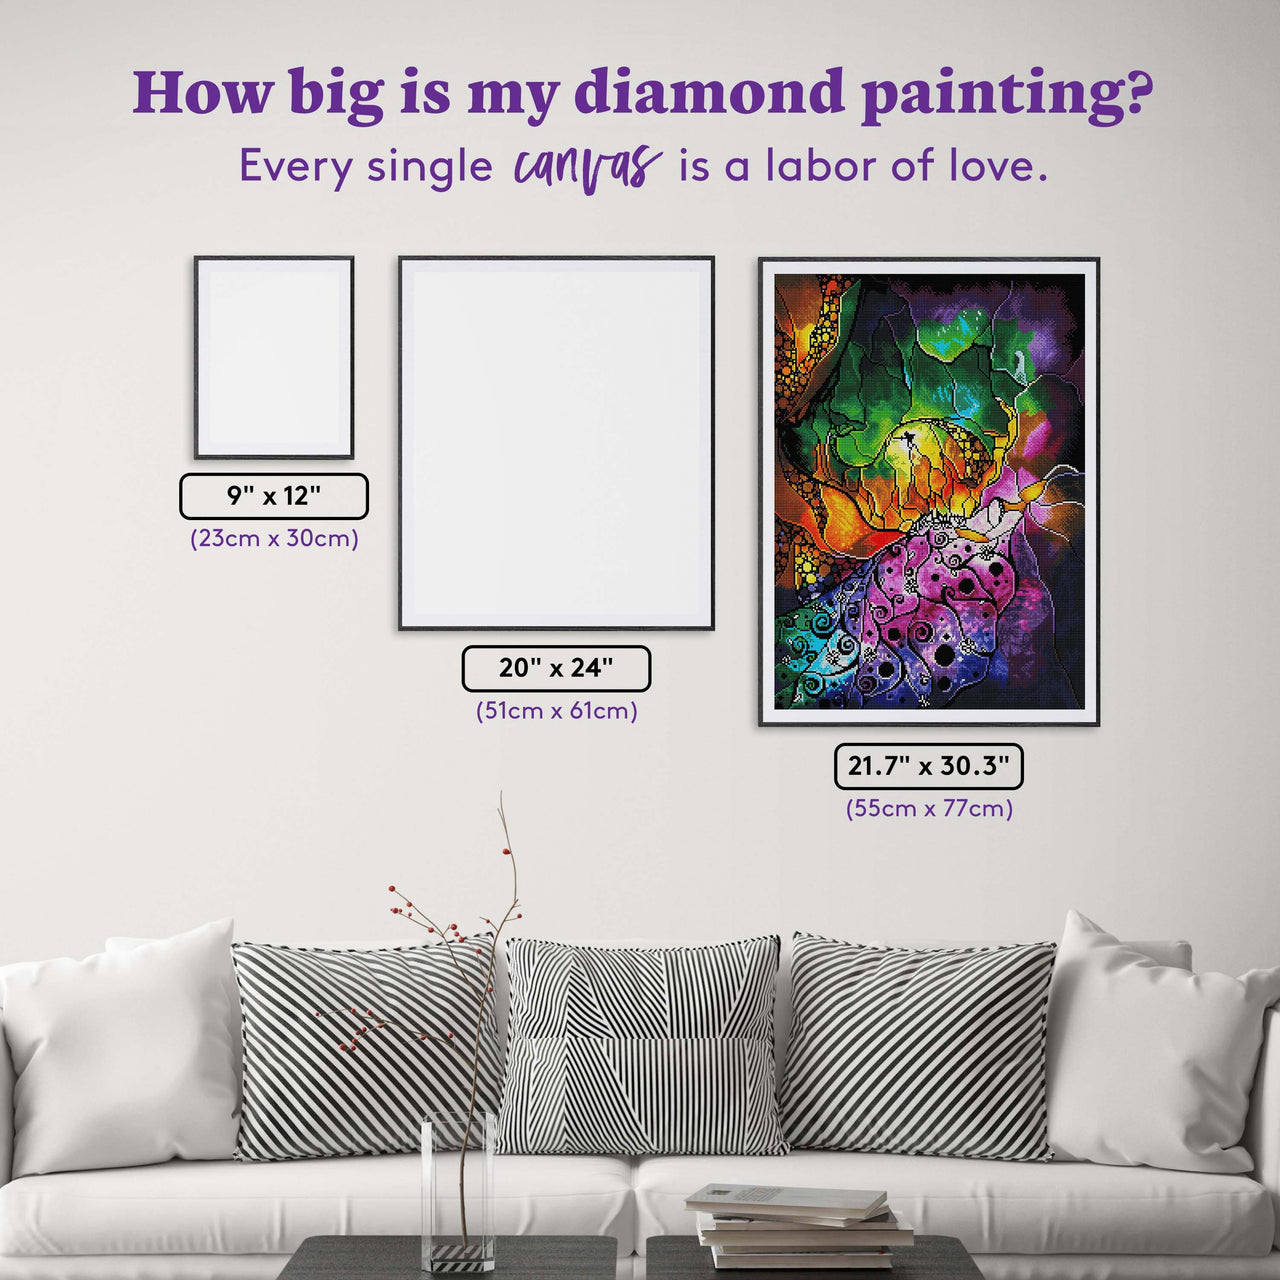 Diamond Painting The Sleeping Beauty 21.7" x 30.3" (55cm x 77cm) / Round With 46 Colors including 1 AB / 46,645